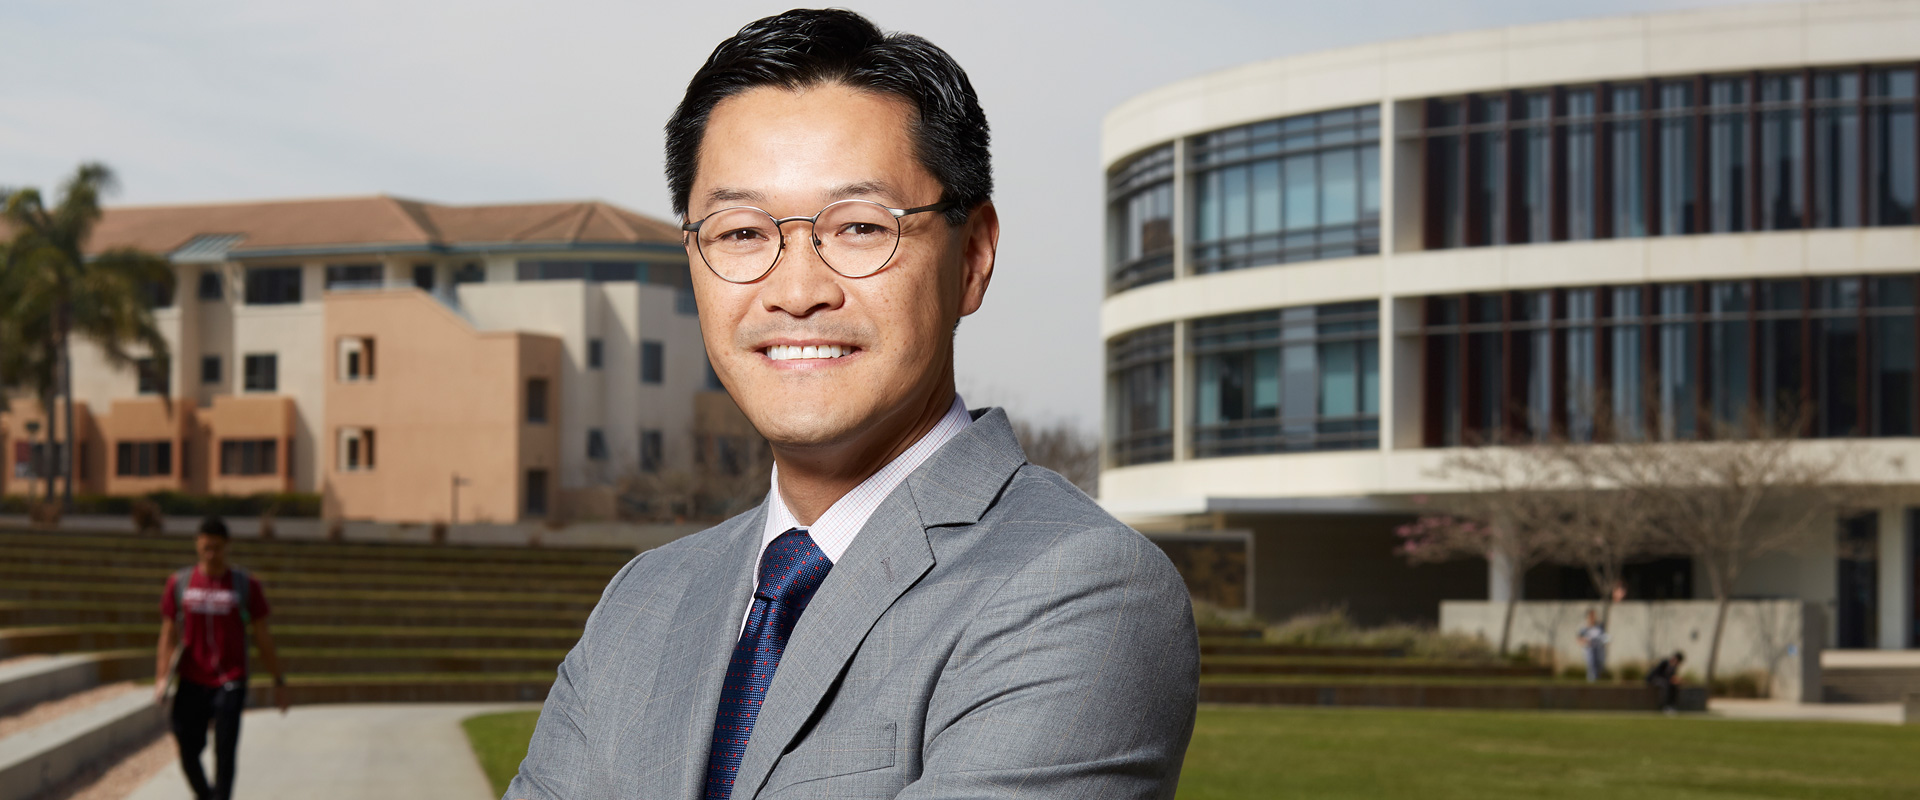 LMU Executive Vice President and Provost Thomas Poon, Ph.D.